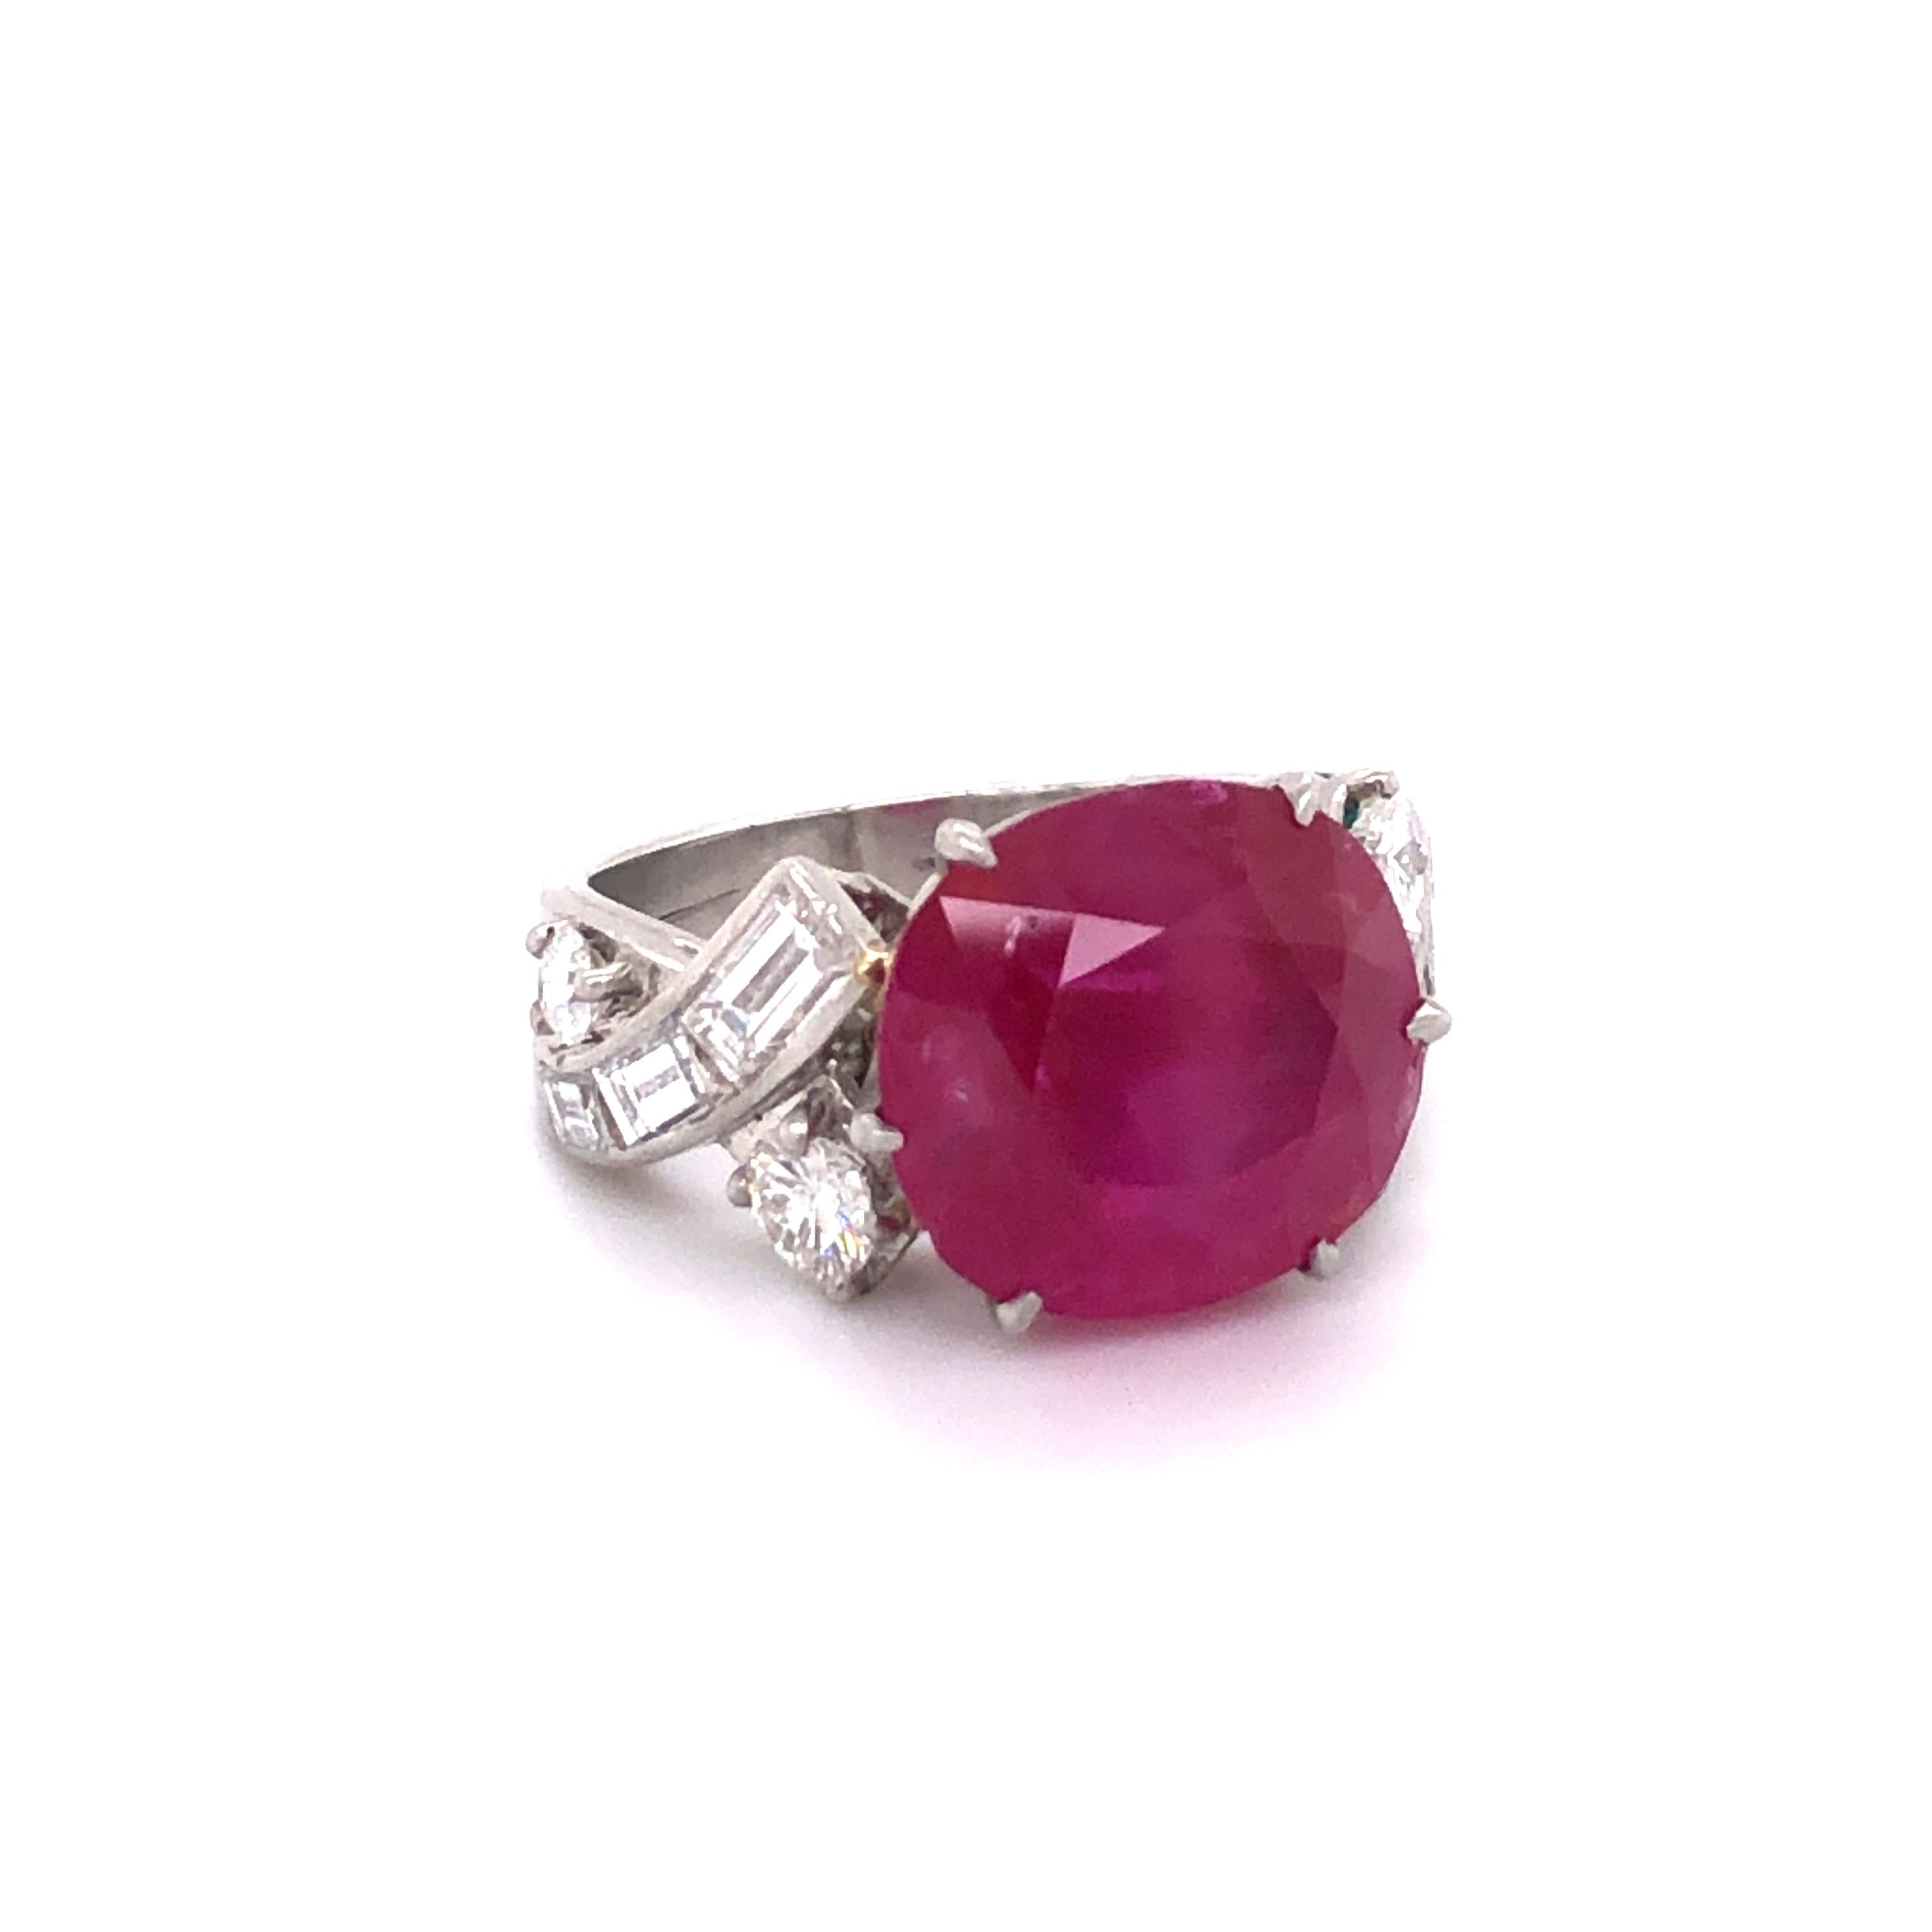 This magnificent ring in platinum is set with a cushion shaped Burma ruby of 10.40 carats. Flanked by four brililant cut diamonds and six baguette shaped diamonds of G/H color and vs clarity, total weight approximately 1.24 carats.

The ruby is